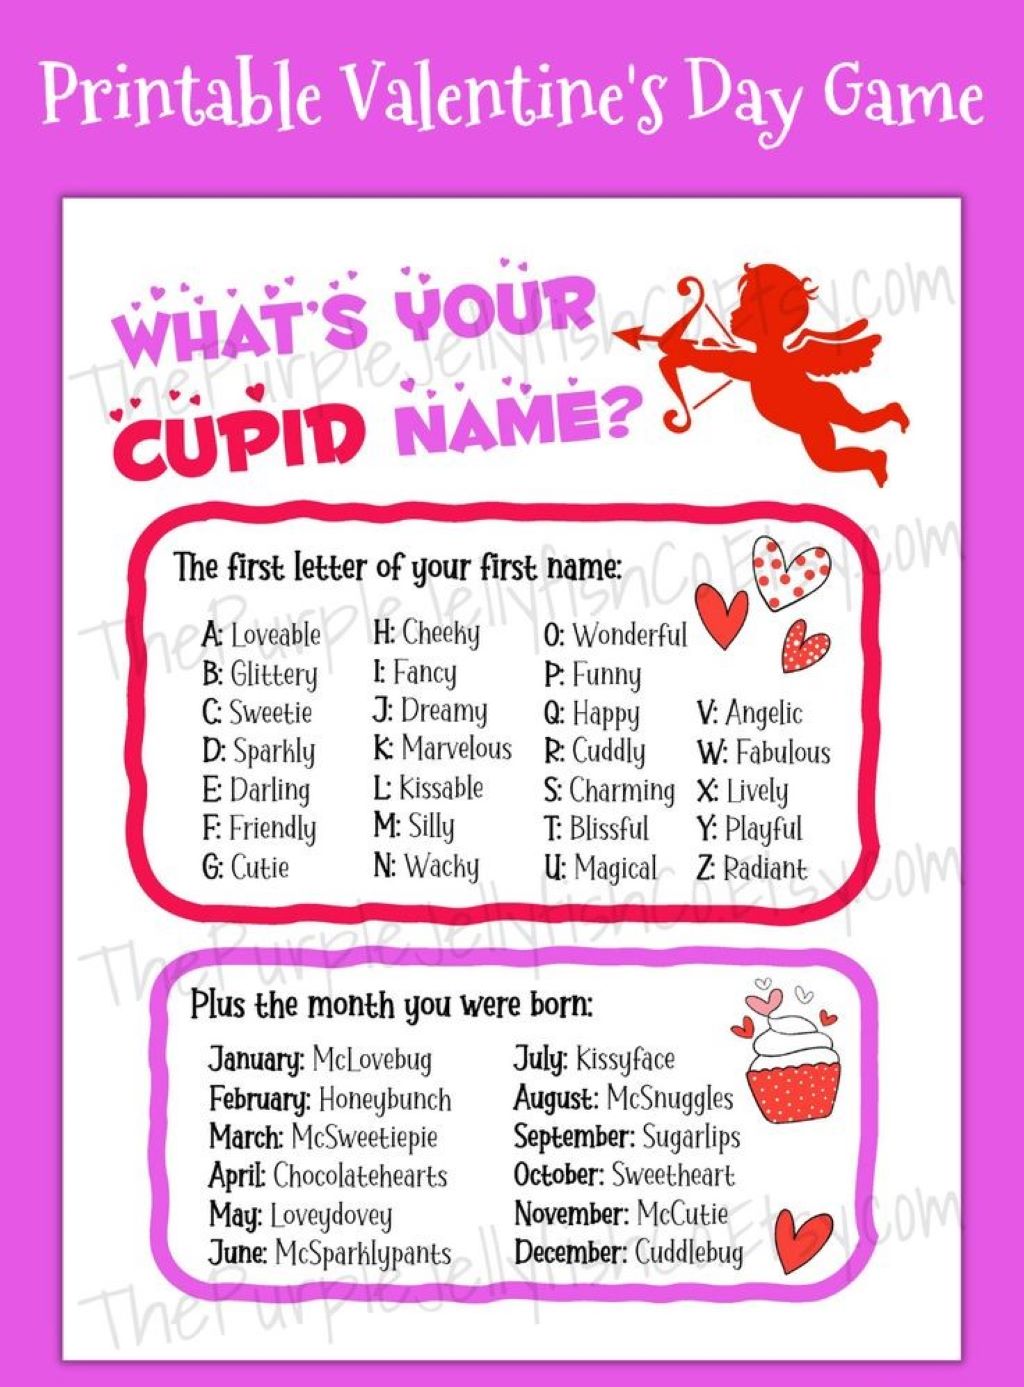 Tips for Using Funny Valentine's Day Names